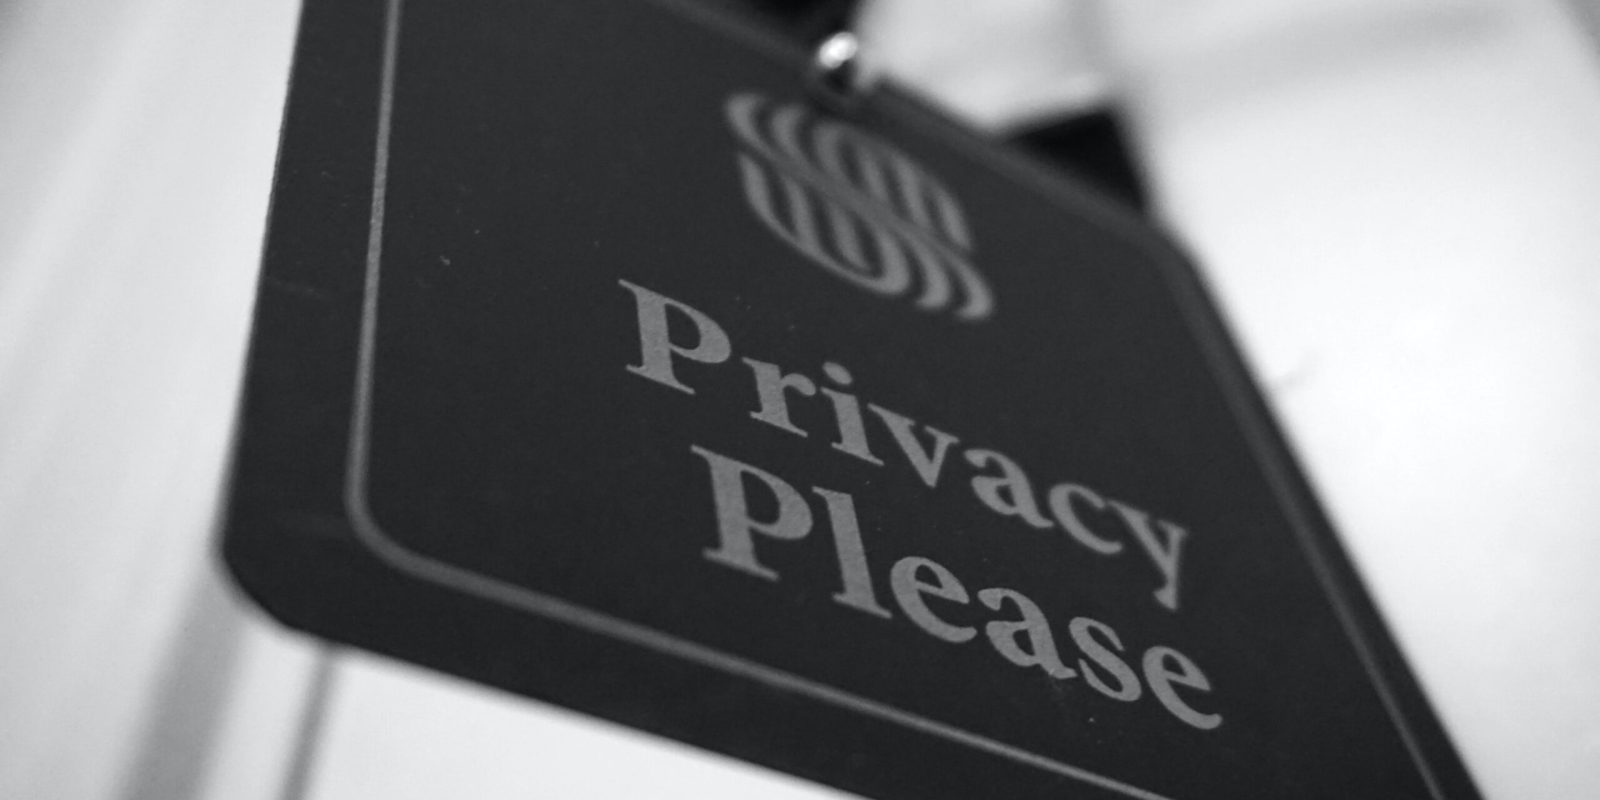 Privacy Policy for HOA's